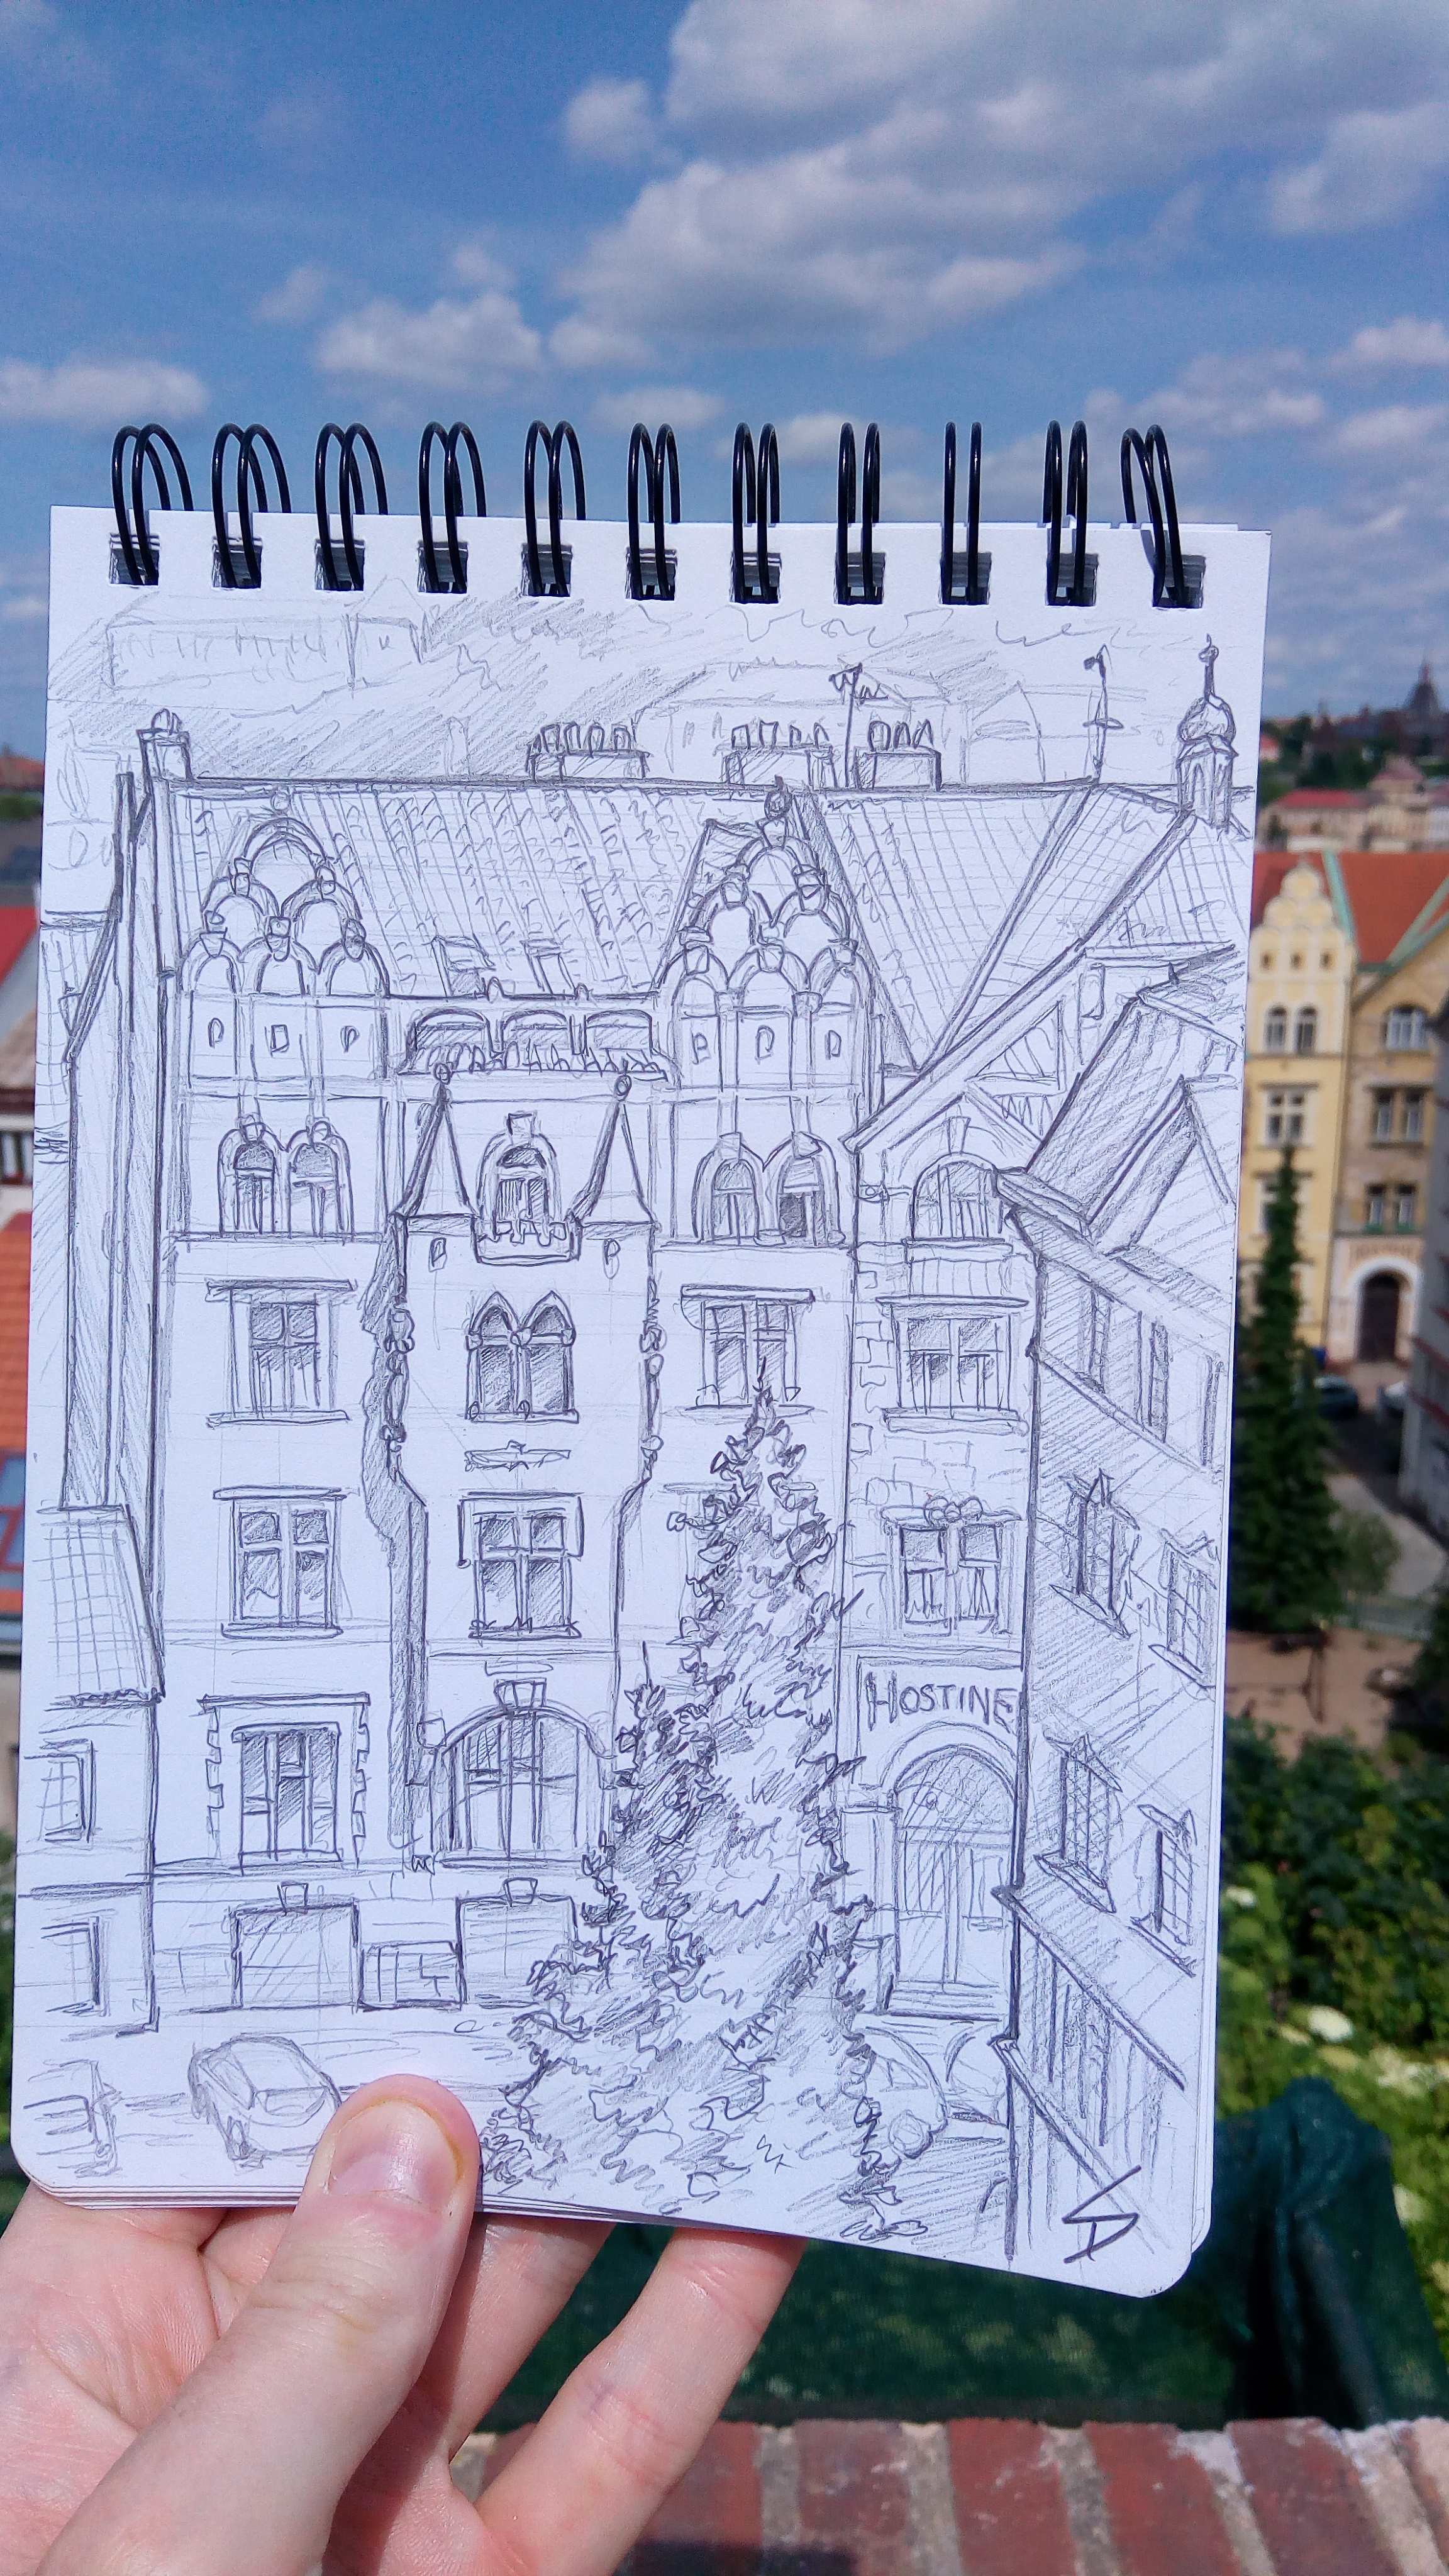 Urban art photo – Vysehrad Castle, Prague, Czech Republic. ‘View of Vratislavova from the castle walls.' A stunning castle in Prague, and thankfully lesser known than its famous counterpart on the west bank of the Vltava river. sketchbookexplorer.com @davidasutton @sketchbookexplorer Facebook.com/davidanthonysutton #sketch #drawing #art #prague #vysehrad #castle #praha #travel #travelblog #czechrepublic